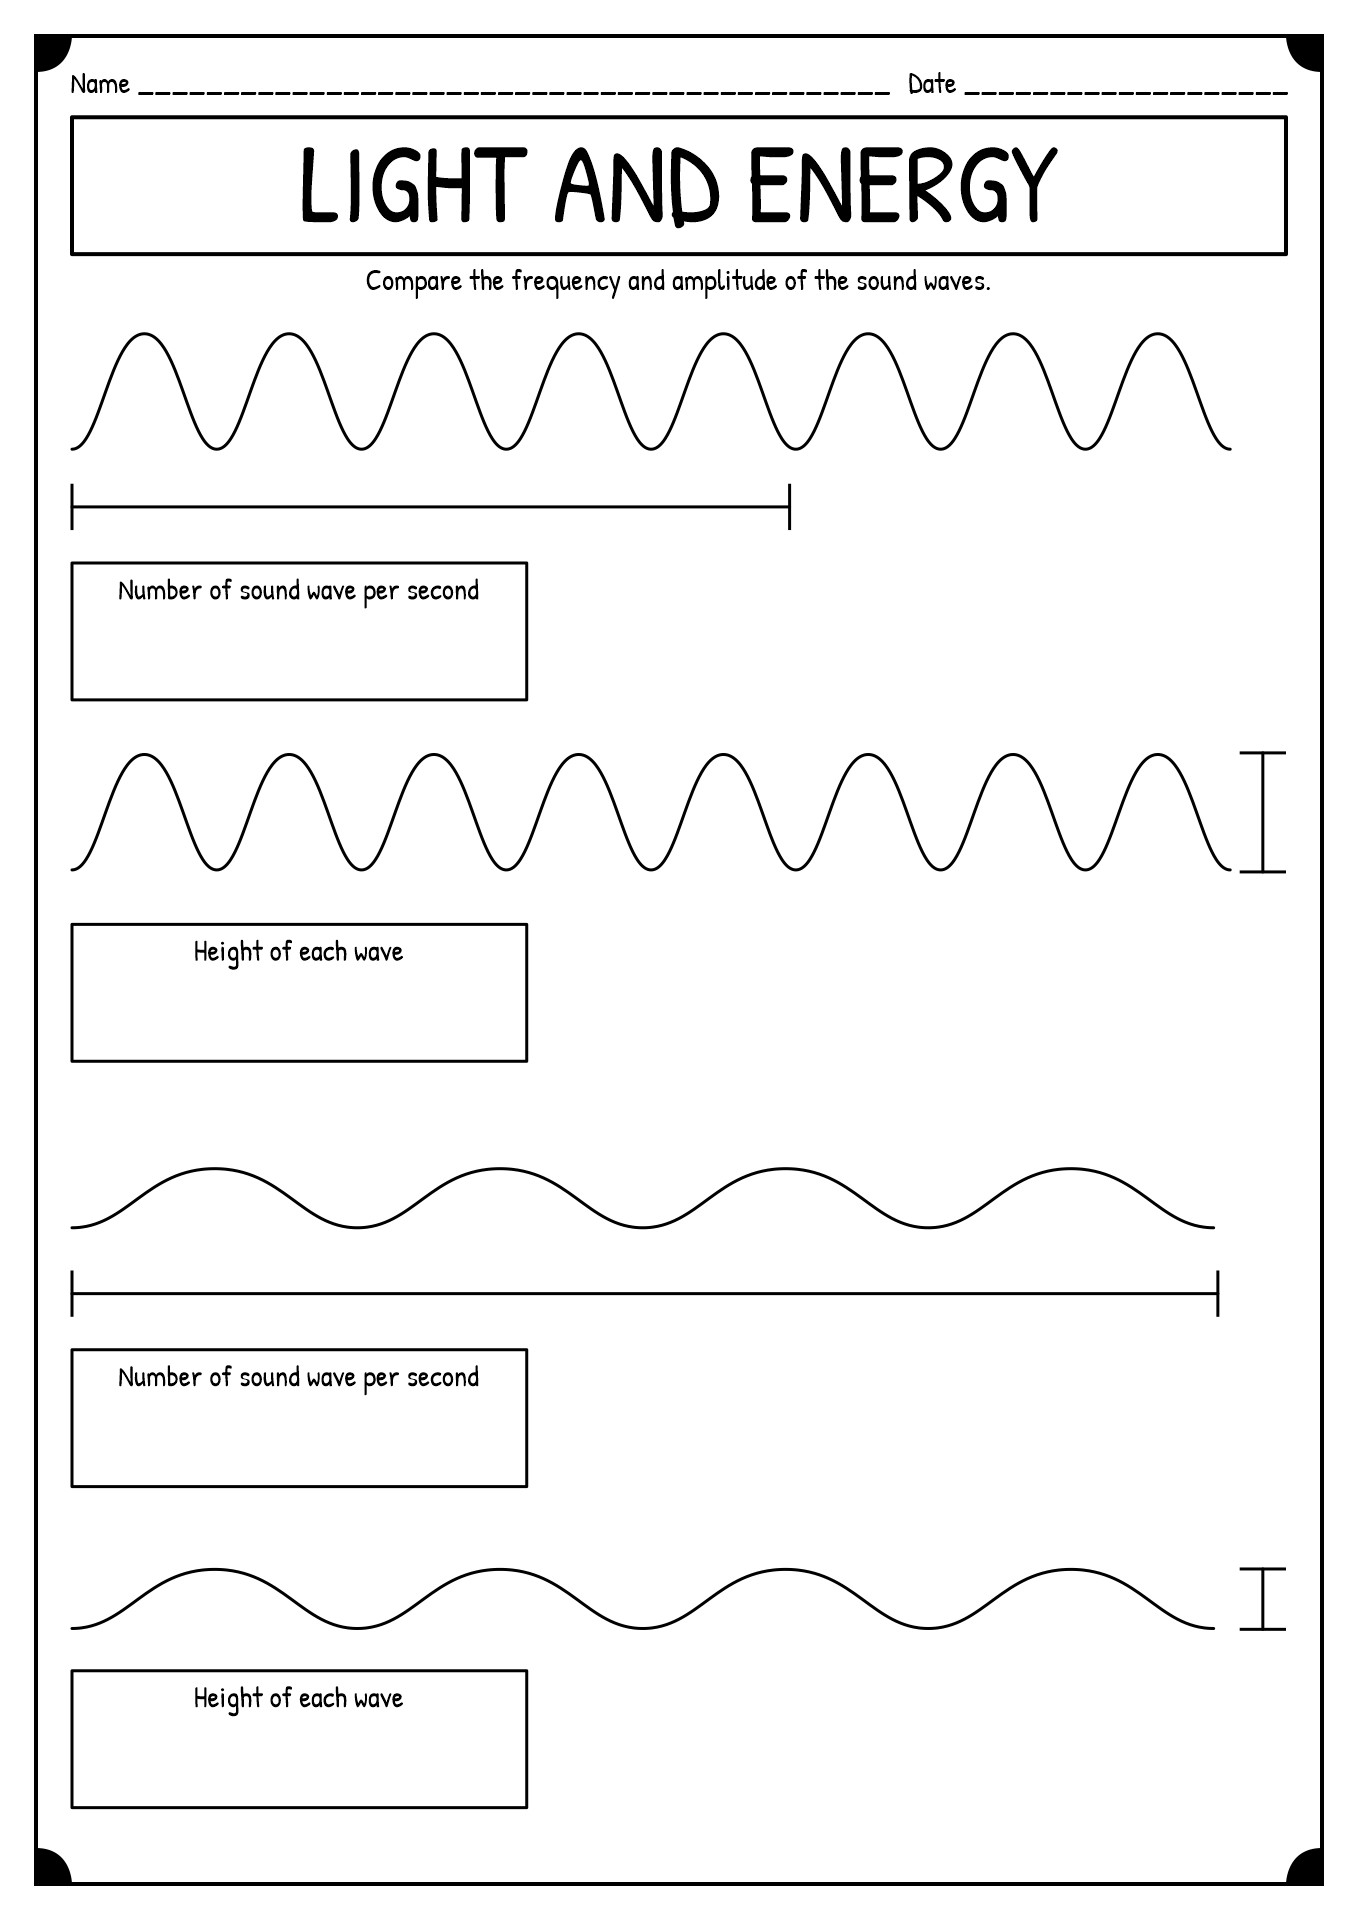 Light and Sound Waves Image